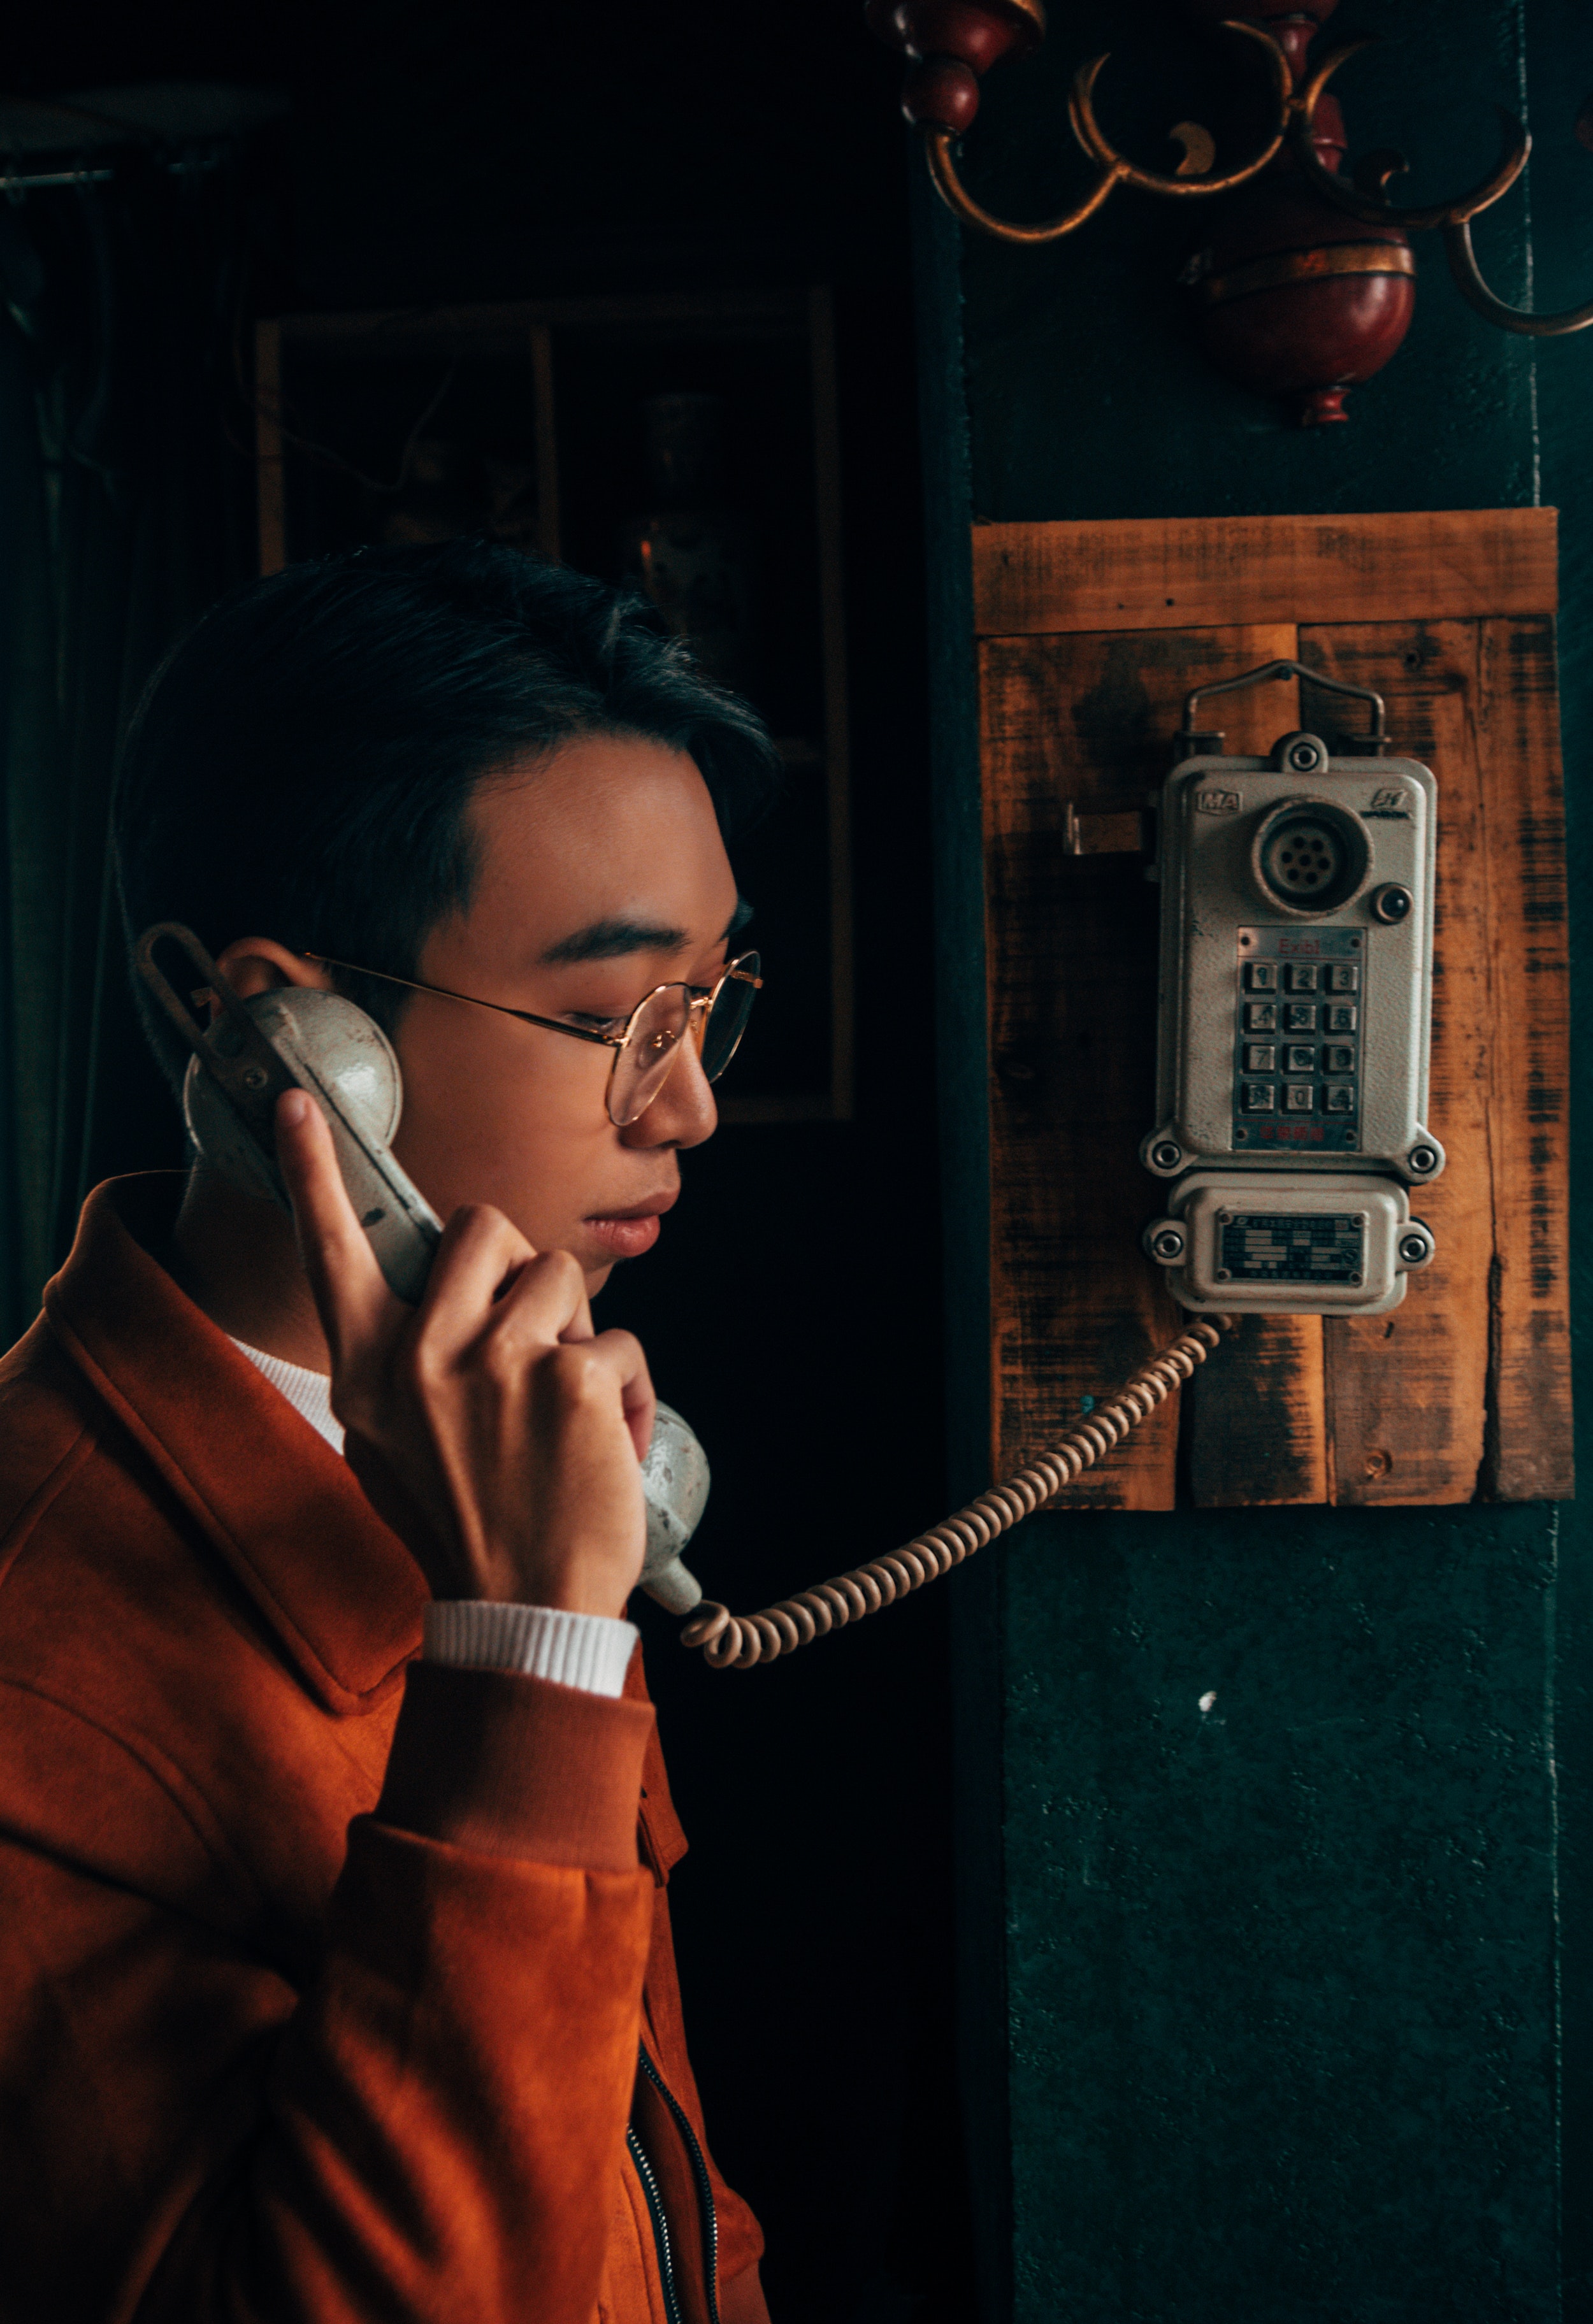 A man wearing a red jacket and glasses holding a gray cradle telephone